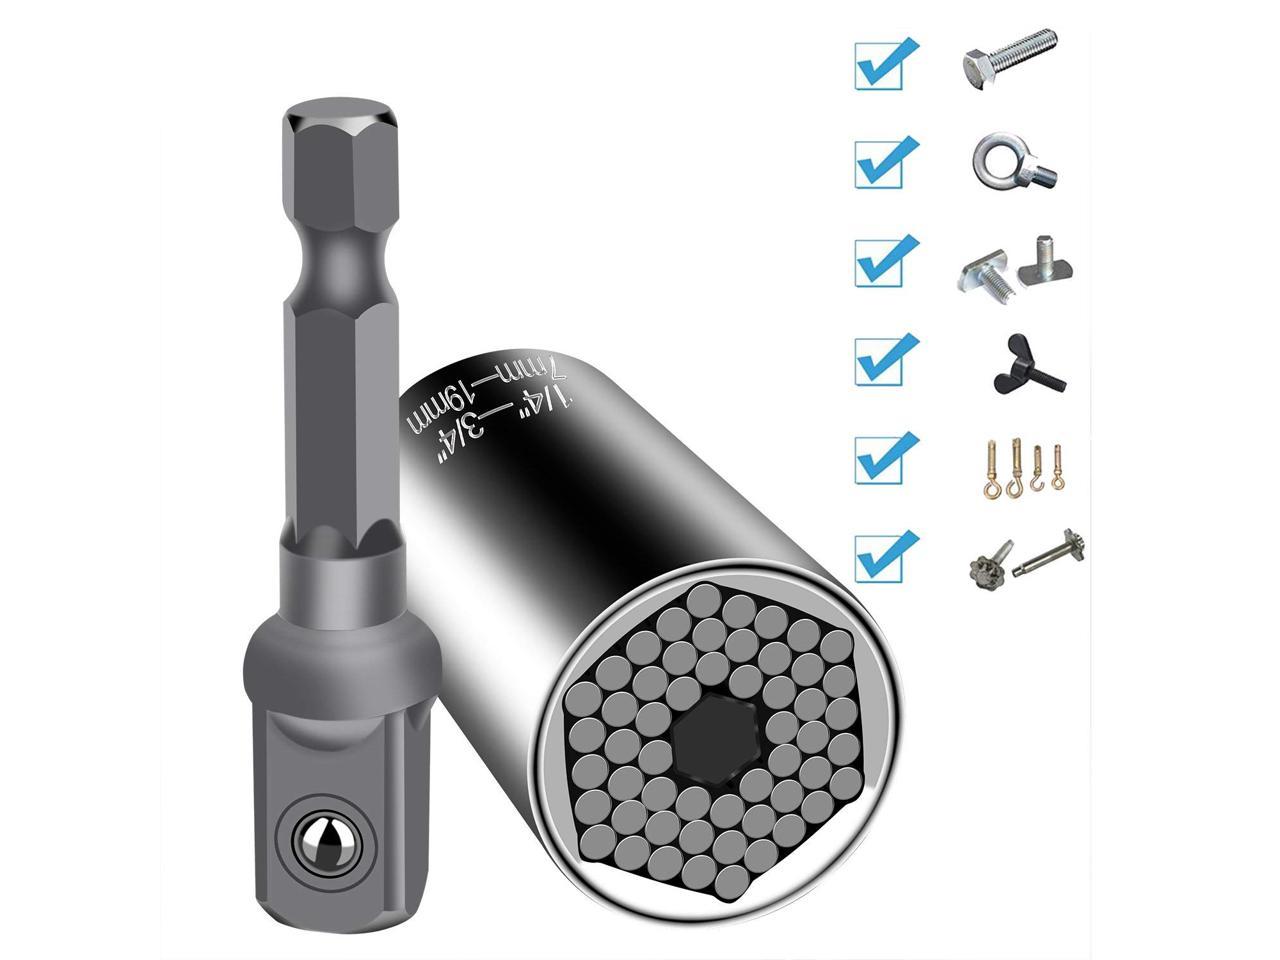 Universal Socket, Multi-function Standard 1/4'' - 3/4'', Metric 7mm-19mm,  One for All Socket Ratchet Wrench with Power Drill Adapter, Professional 